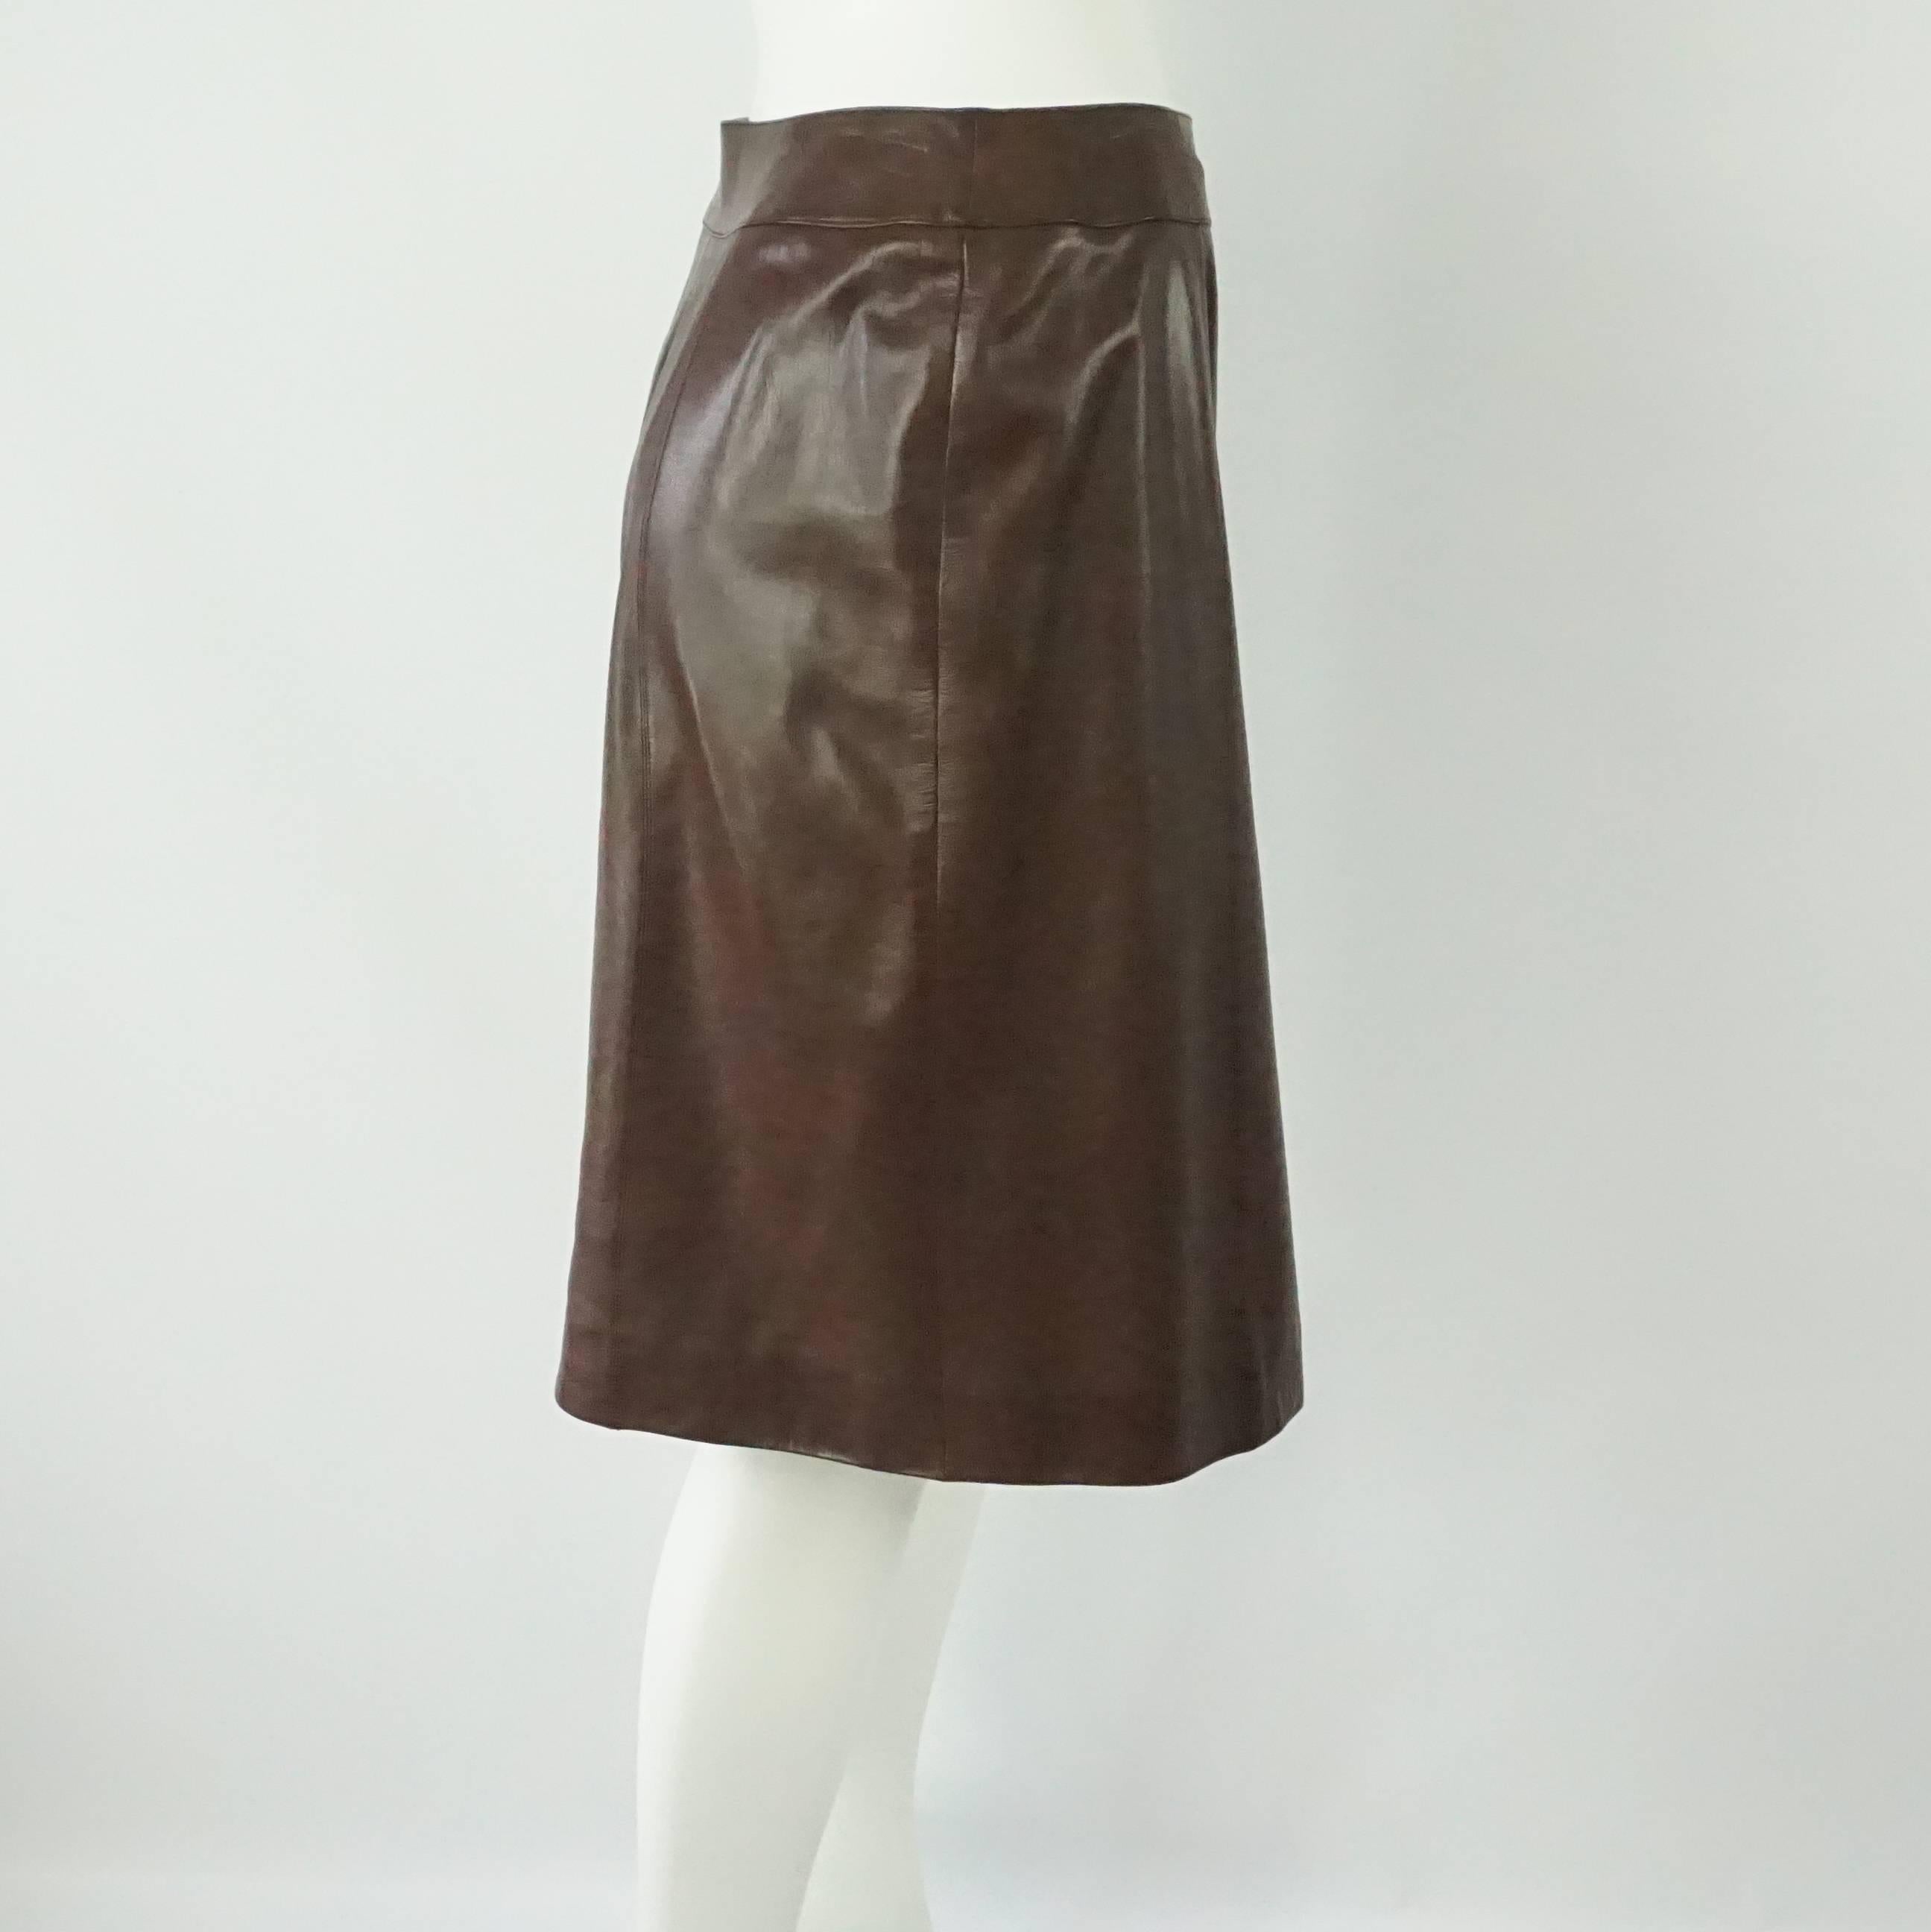 Chanel Brown Lambskin Wrap Skirt - 40 - 01A. This beautiful skirt is perfect for fall and a great staple to amp up any outfit. It has 4 buttons in the front towards the side with a 